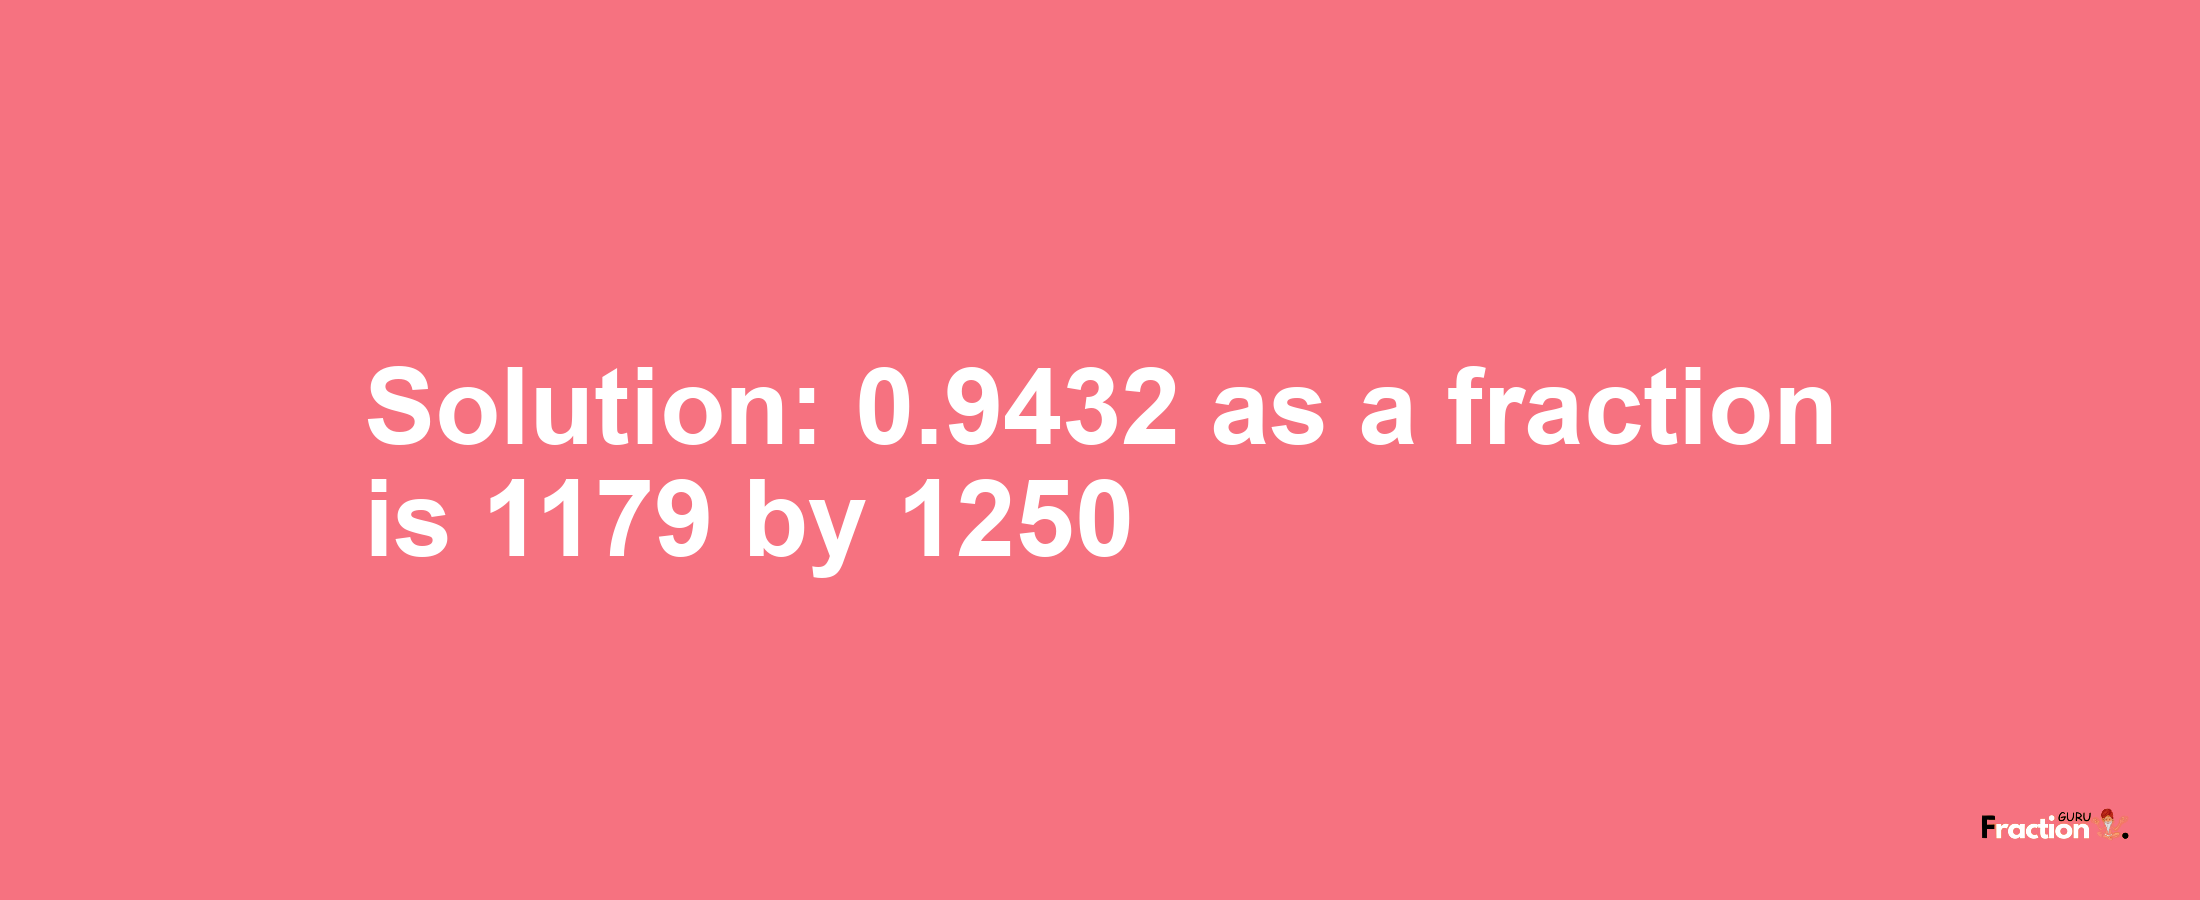 Solution:0.9432 as a fraction is 1179/1250